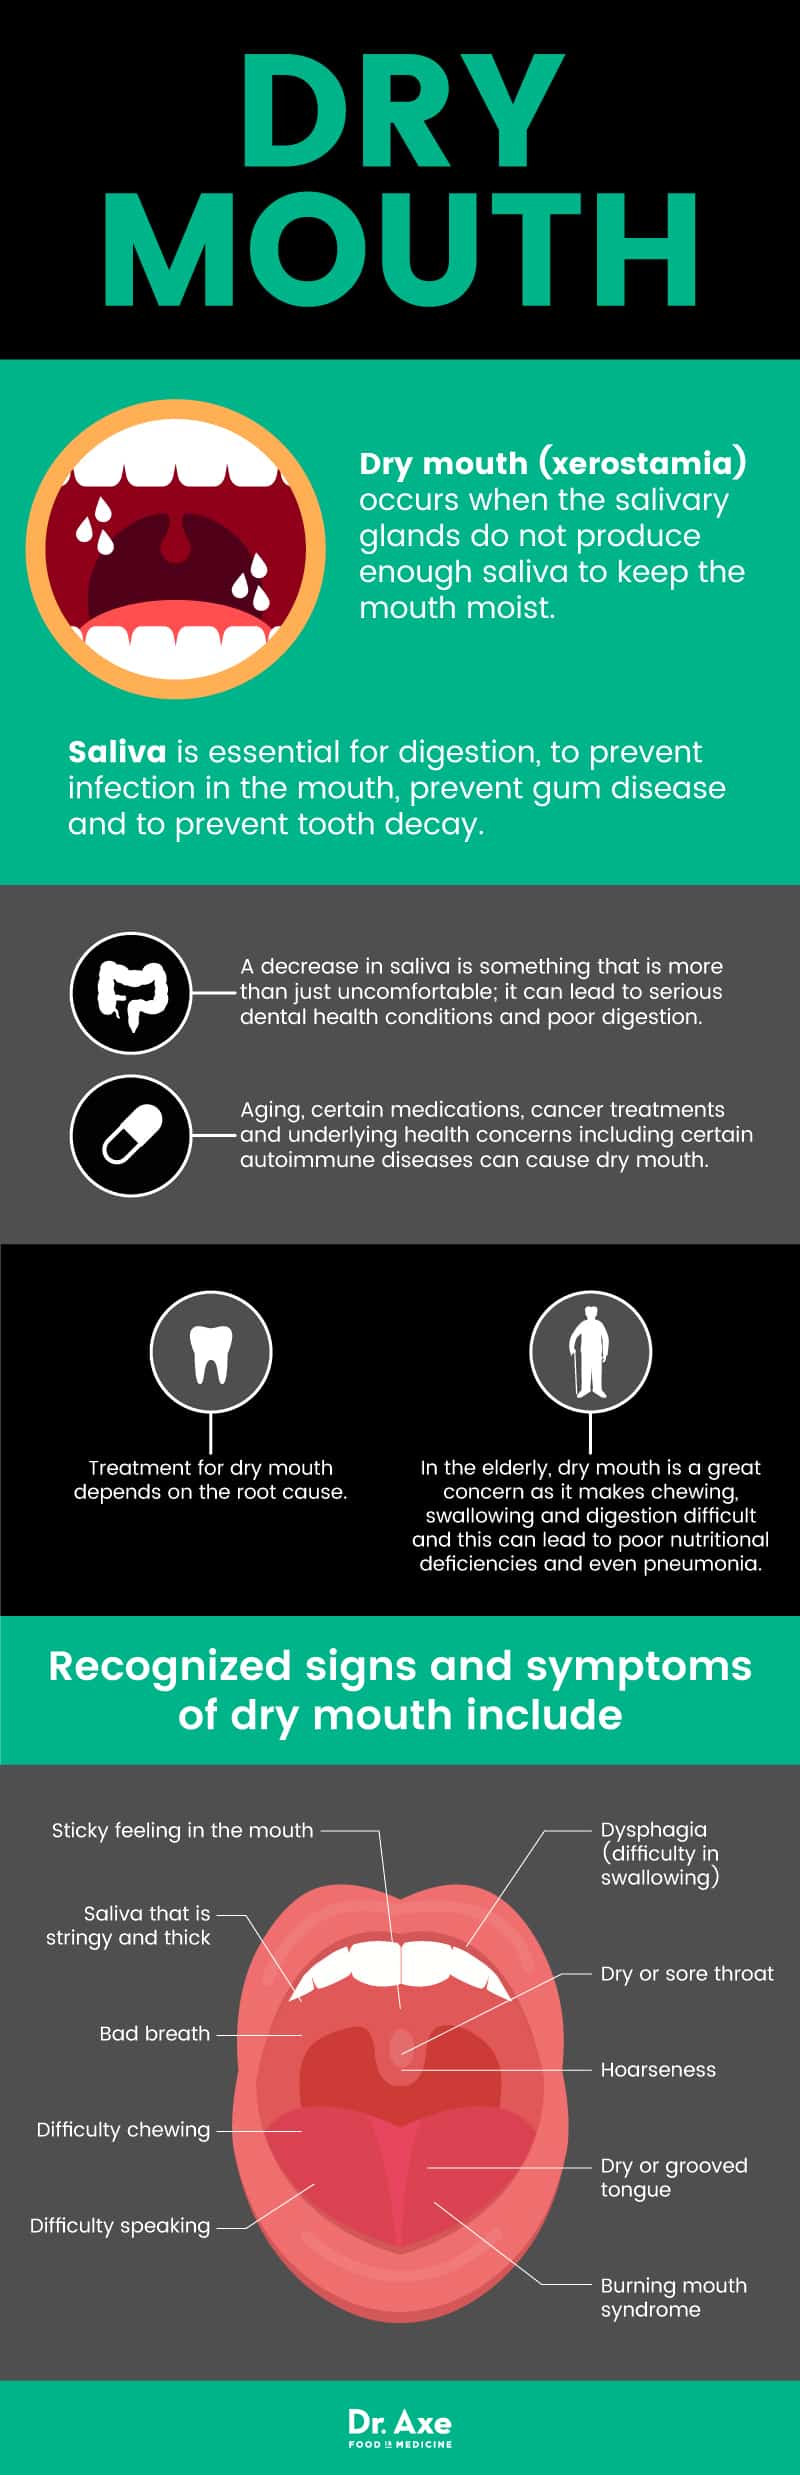 What is dry mouth? - Dr. Axe